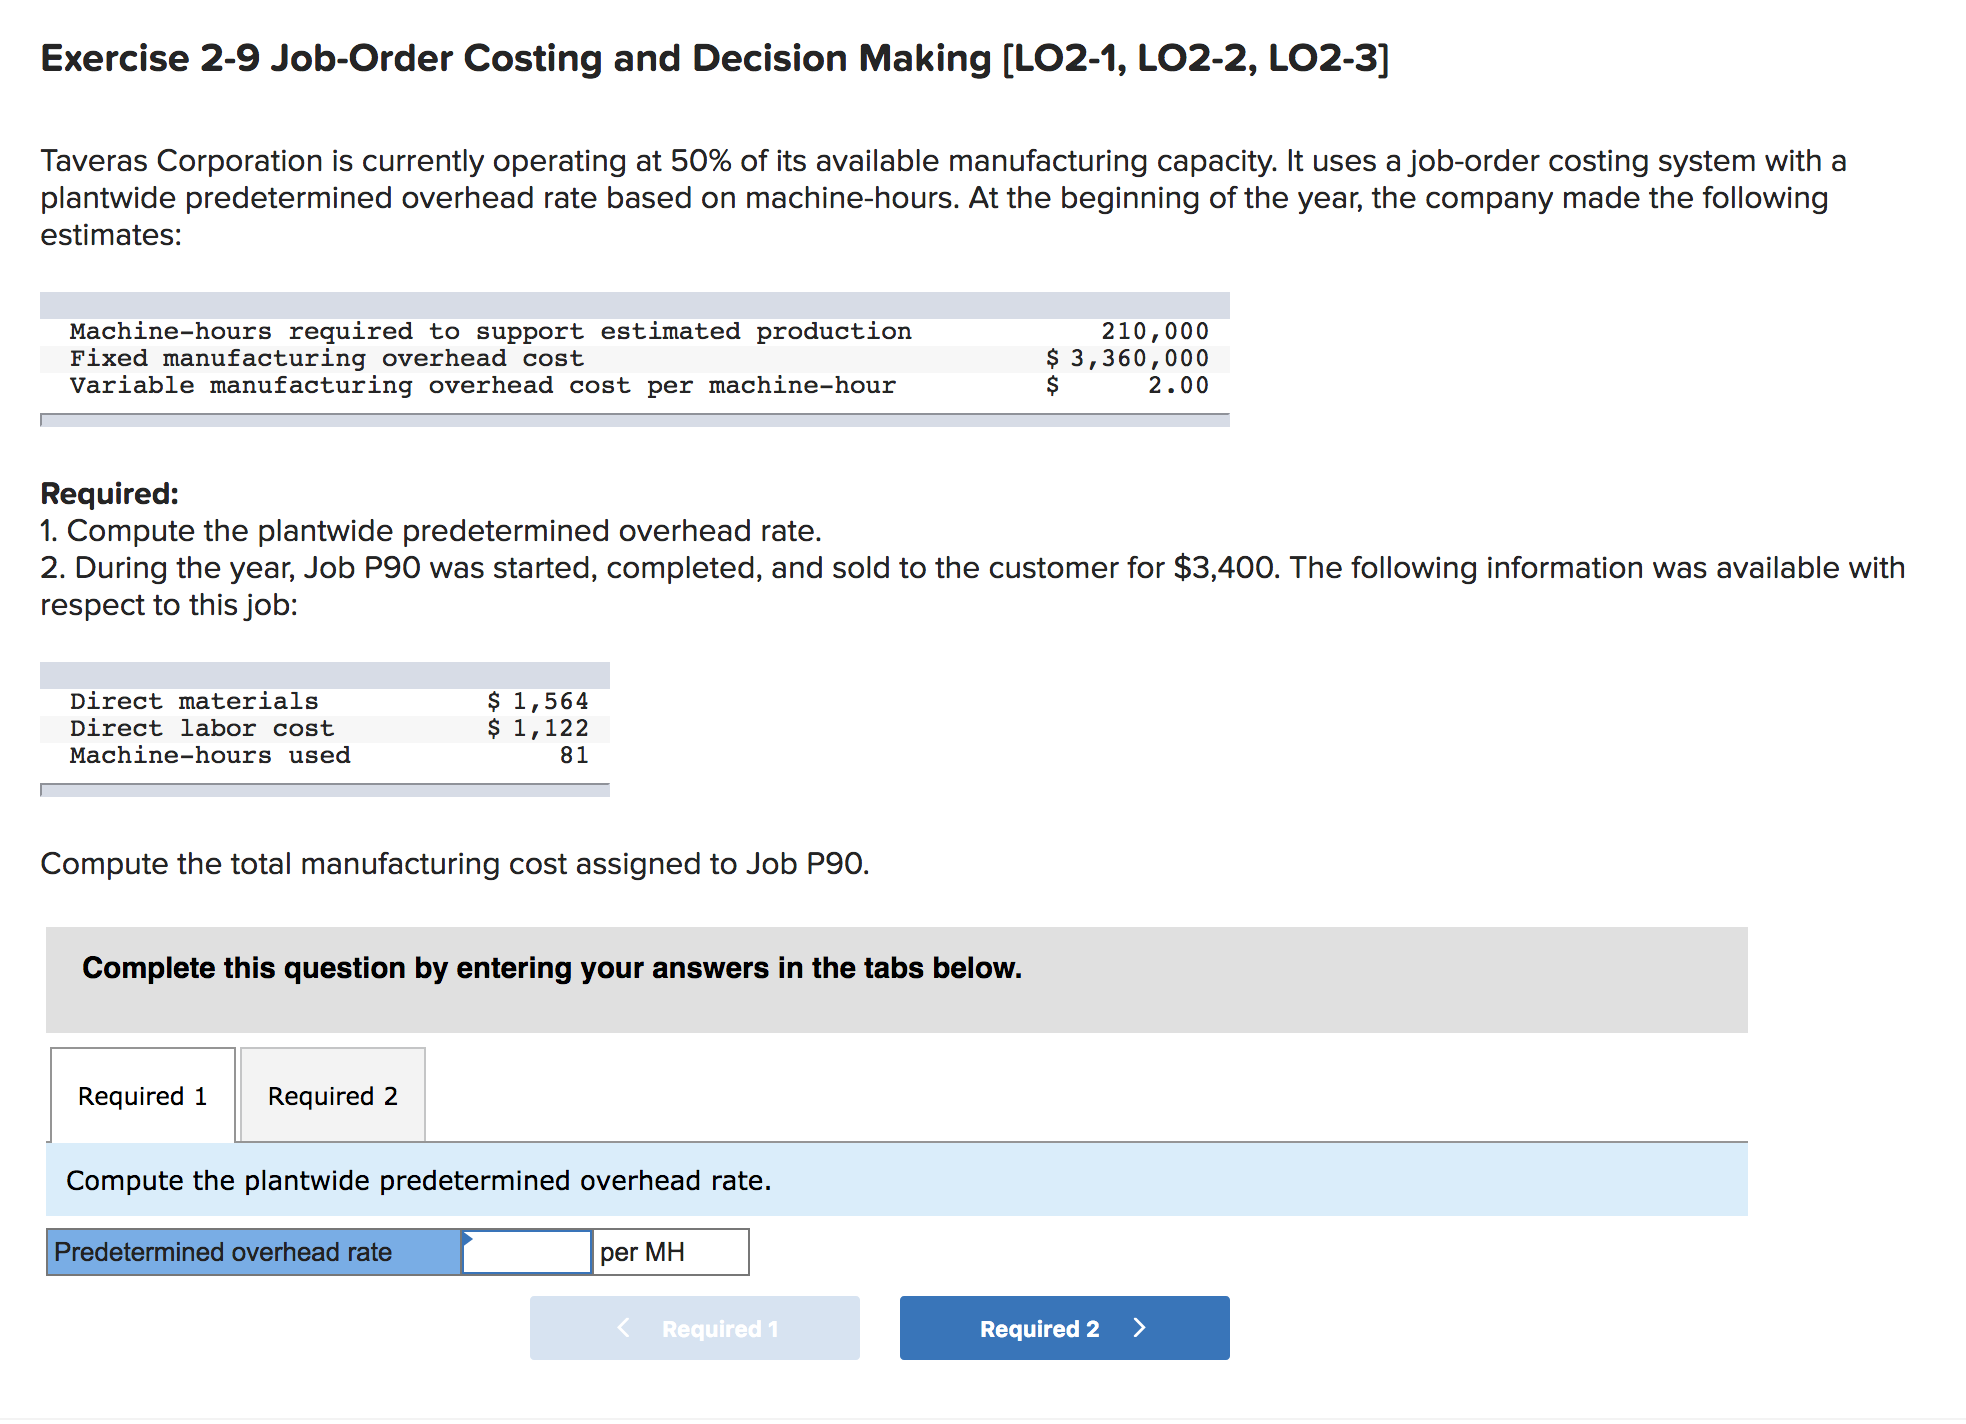 Exercise 2-9 Job-Order Costing and Decision Making [LO2-1, LO2-2, LO2-3]
Taveras Corporation is currently operating at 50% of its available manufacturing capacity. It uses a job-order costing system with a
plantwide predetermined overhead rate based on machine-hours. At the beginning of the year, the company made the following
estimates:
Machine-hours required to support estimated production
Fixed manufacturing overhead cost
Variable manufacturing overhead cost per machine-hour
210,000
$ 3,360,000
2.00
Required:
1. Compute the plantwide predetermined overhead rate.
2. During the year, Job P90 was started, completed, and sold to the customer for $3,400. The following information was available with
respect to this job:
$ 1,564
$ 1,122
81
Direct materials
Direct labor cost
Machine-hours used
Compute the total manufacturing cost assigned to Job P90.
Complete this question by entering your answers in the tabs below.
Required 1
Required 2
Compute the plantwide predetermined overhead rate.
Predetermined overhead rate
per MH
Required 1
Required 2
